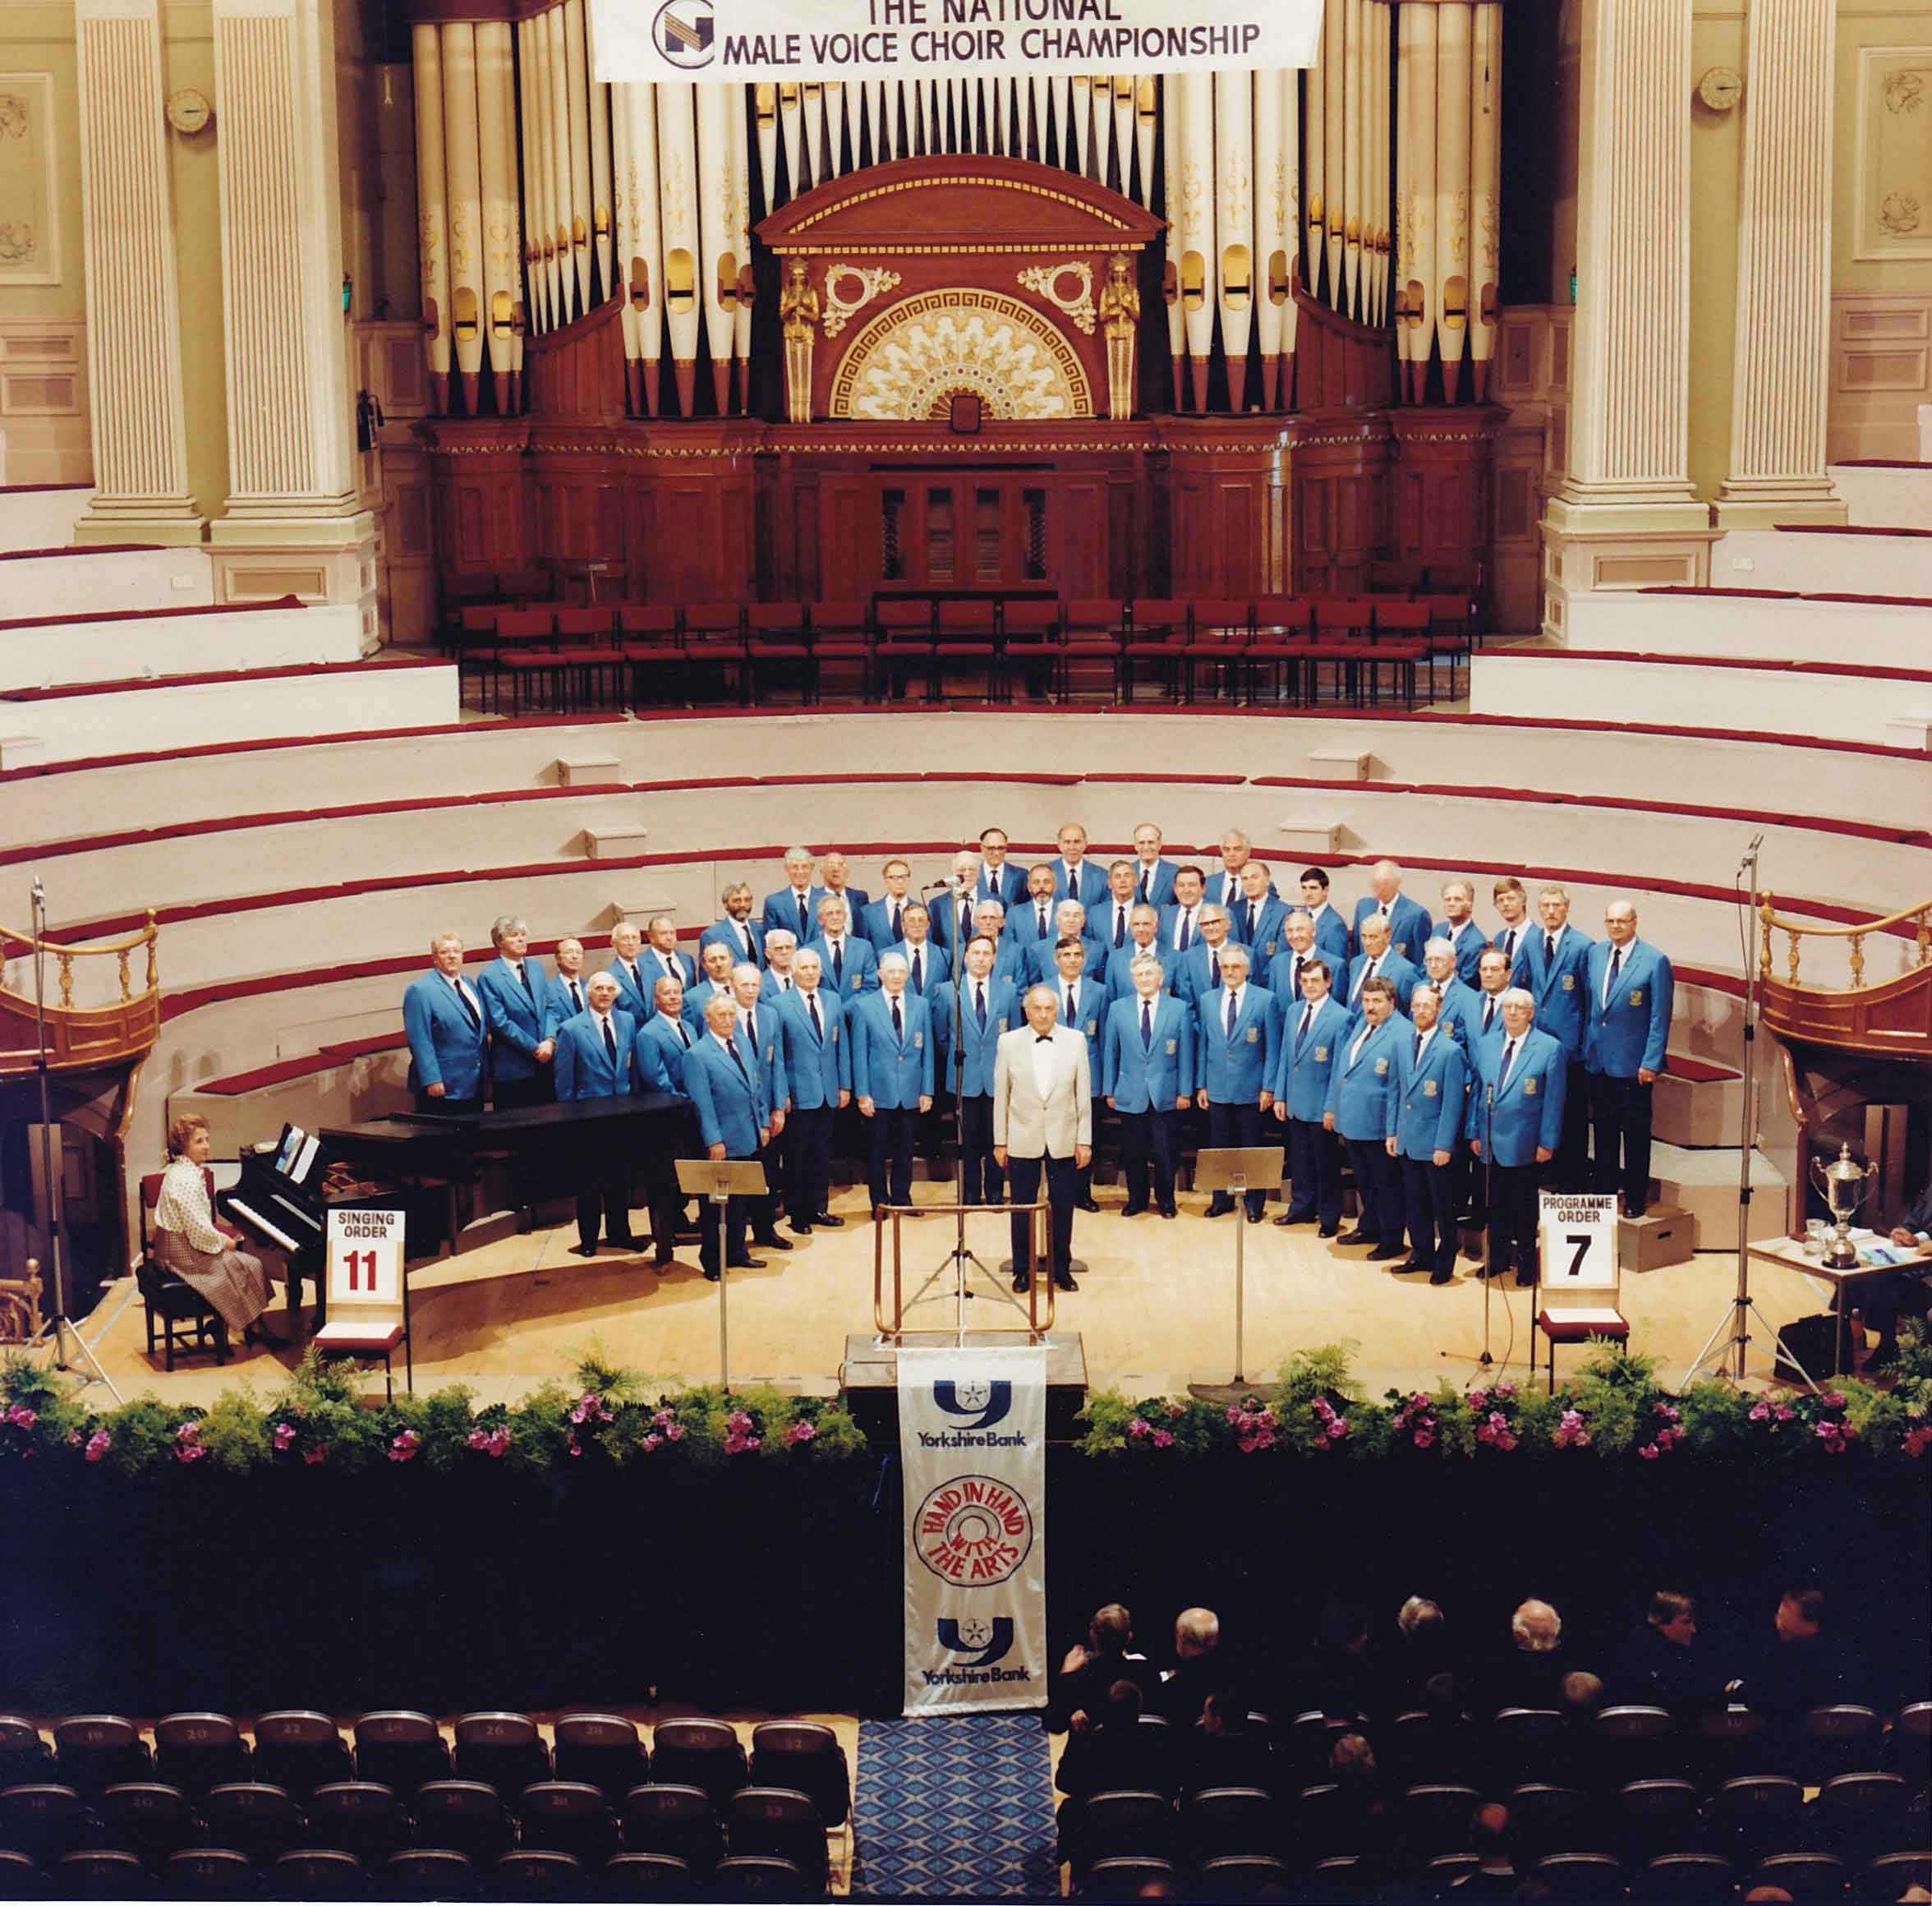 National Male Voice Choir Championship Year unknown